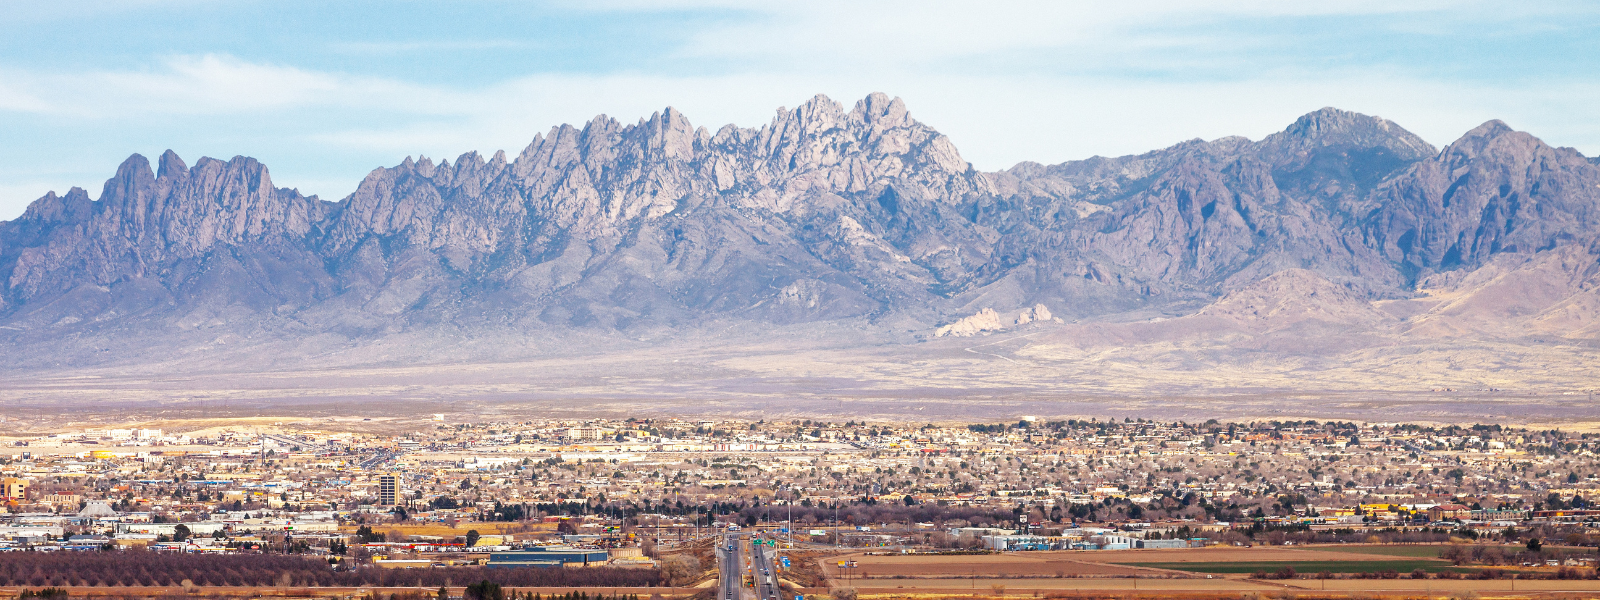 New Mexico landscape with city and mountains in background